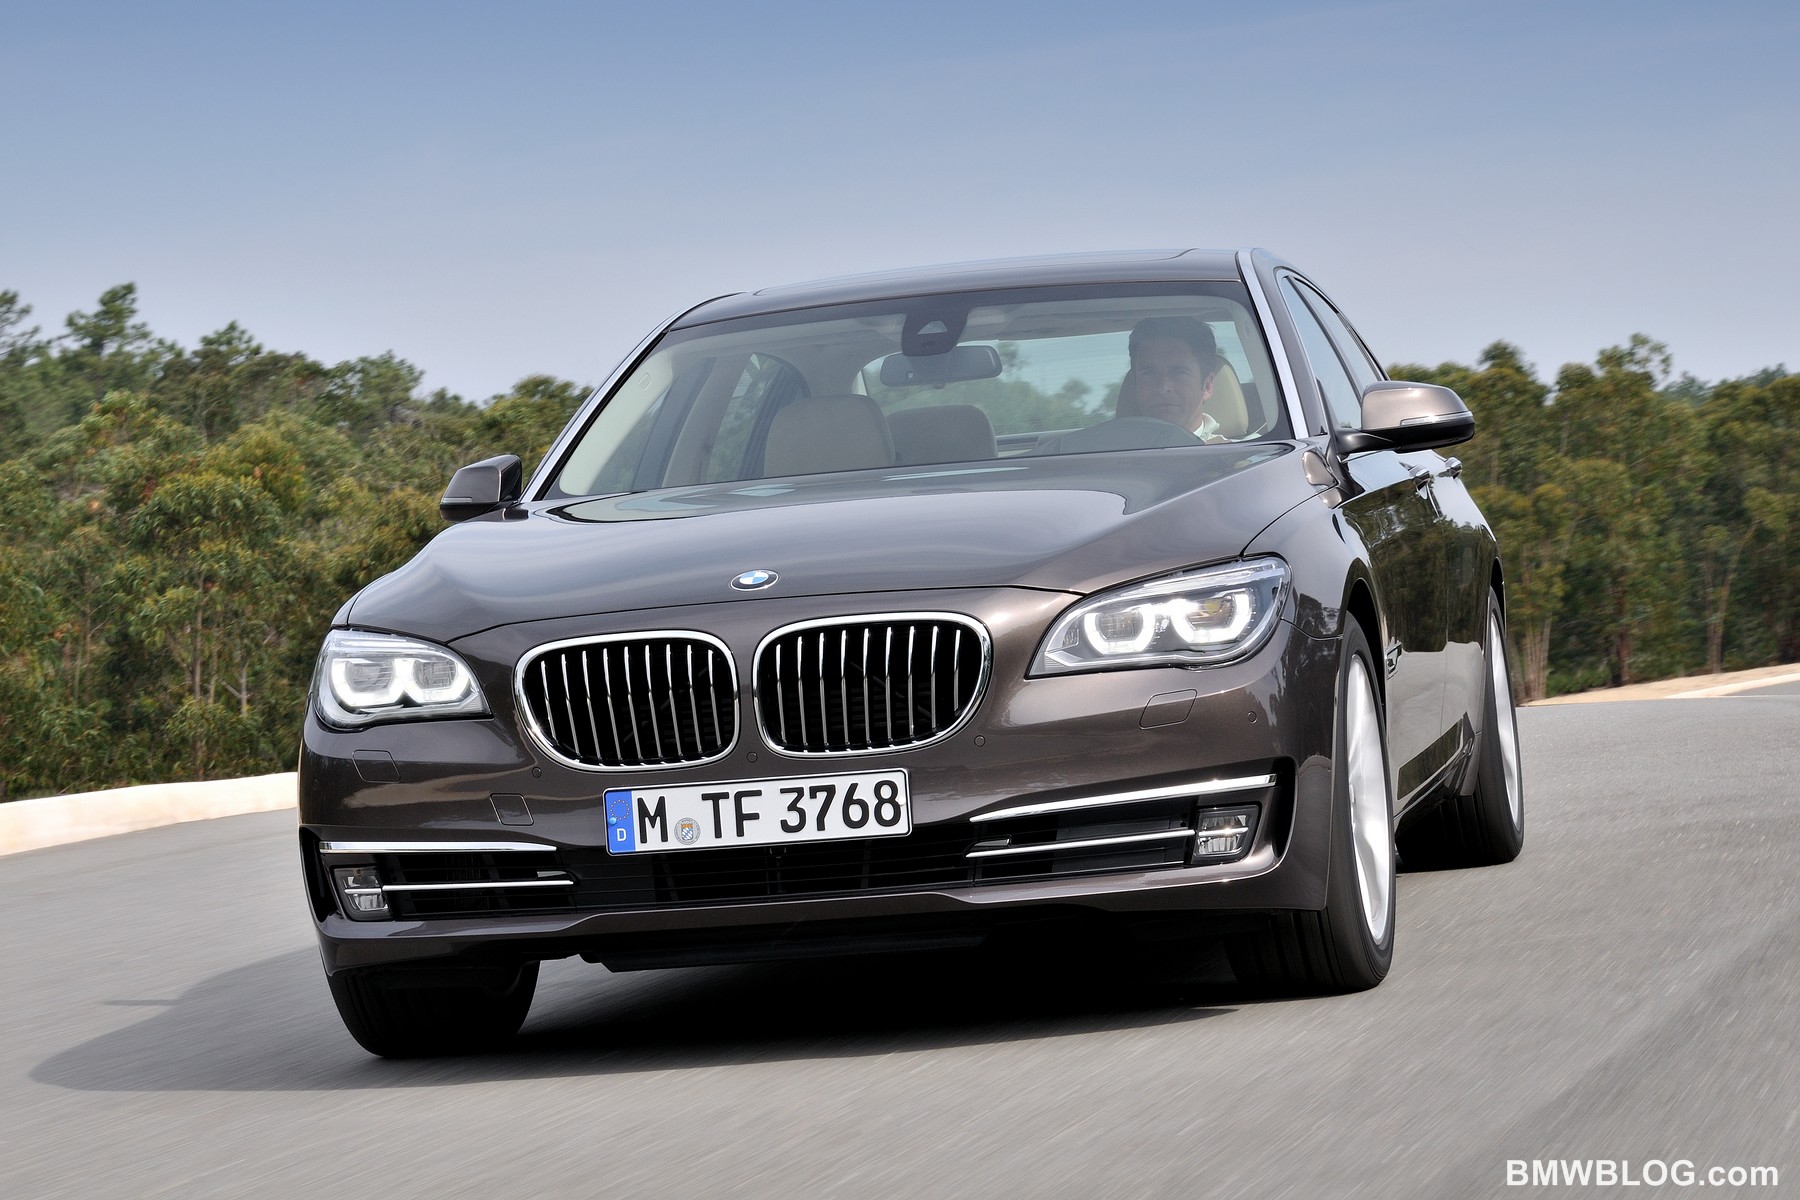 Airbag sensor recall for BMW 7 Series, 5 GT and Rolls-Royce Ghost